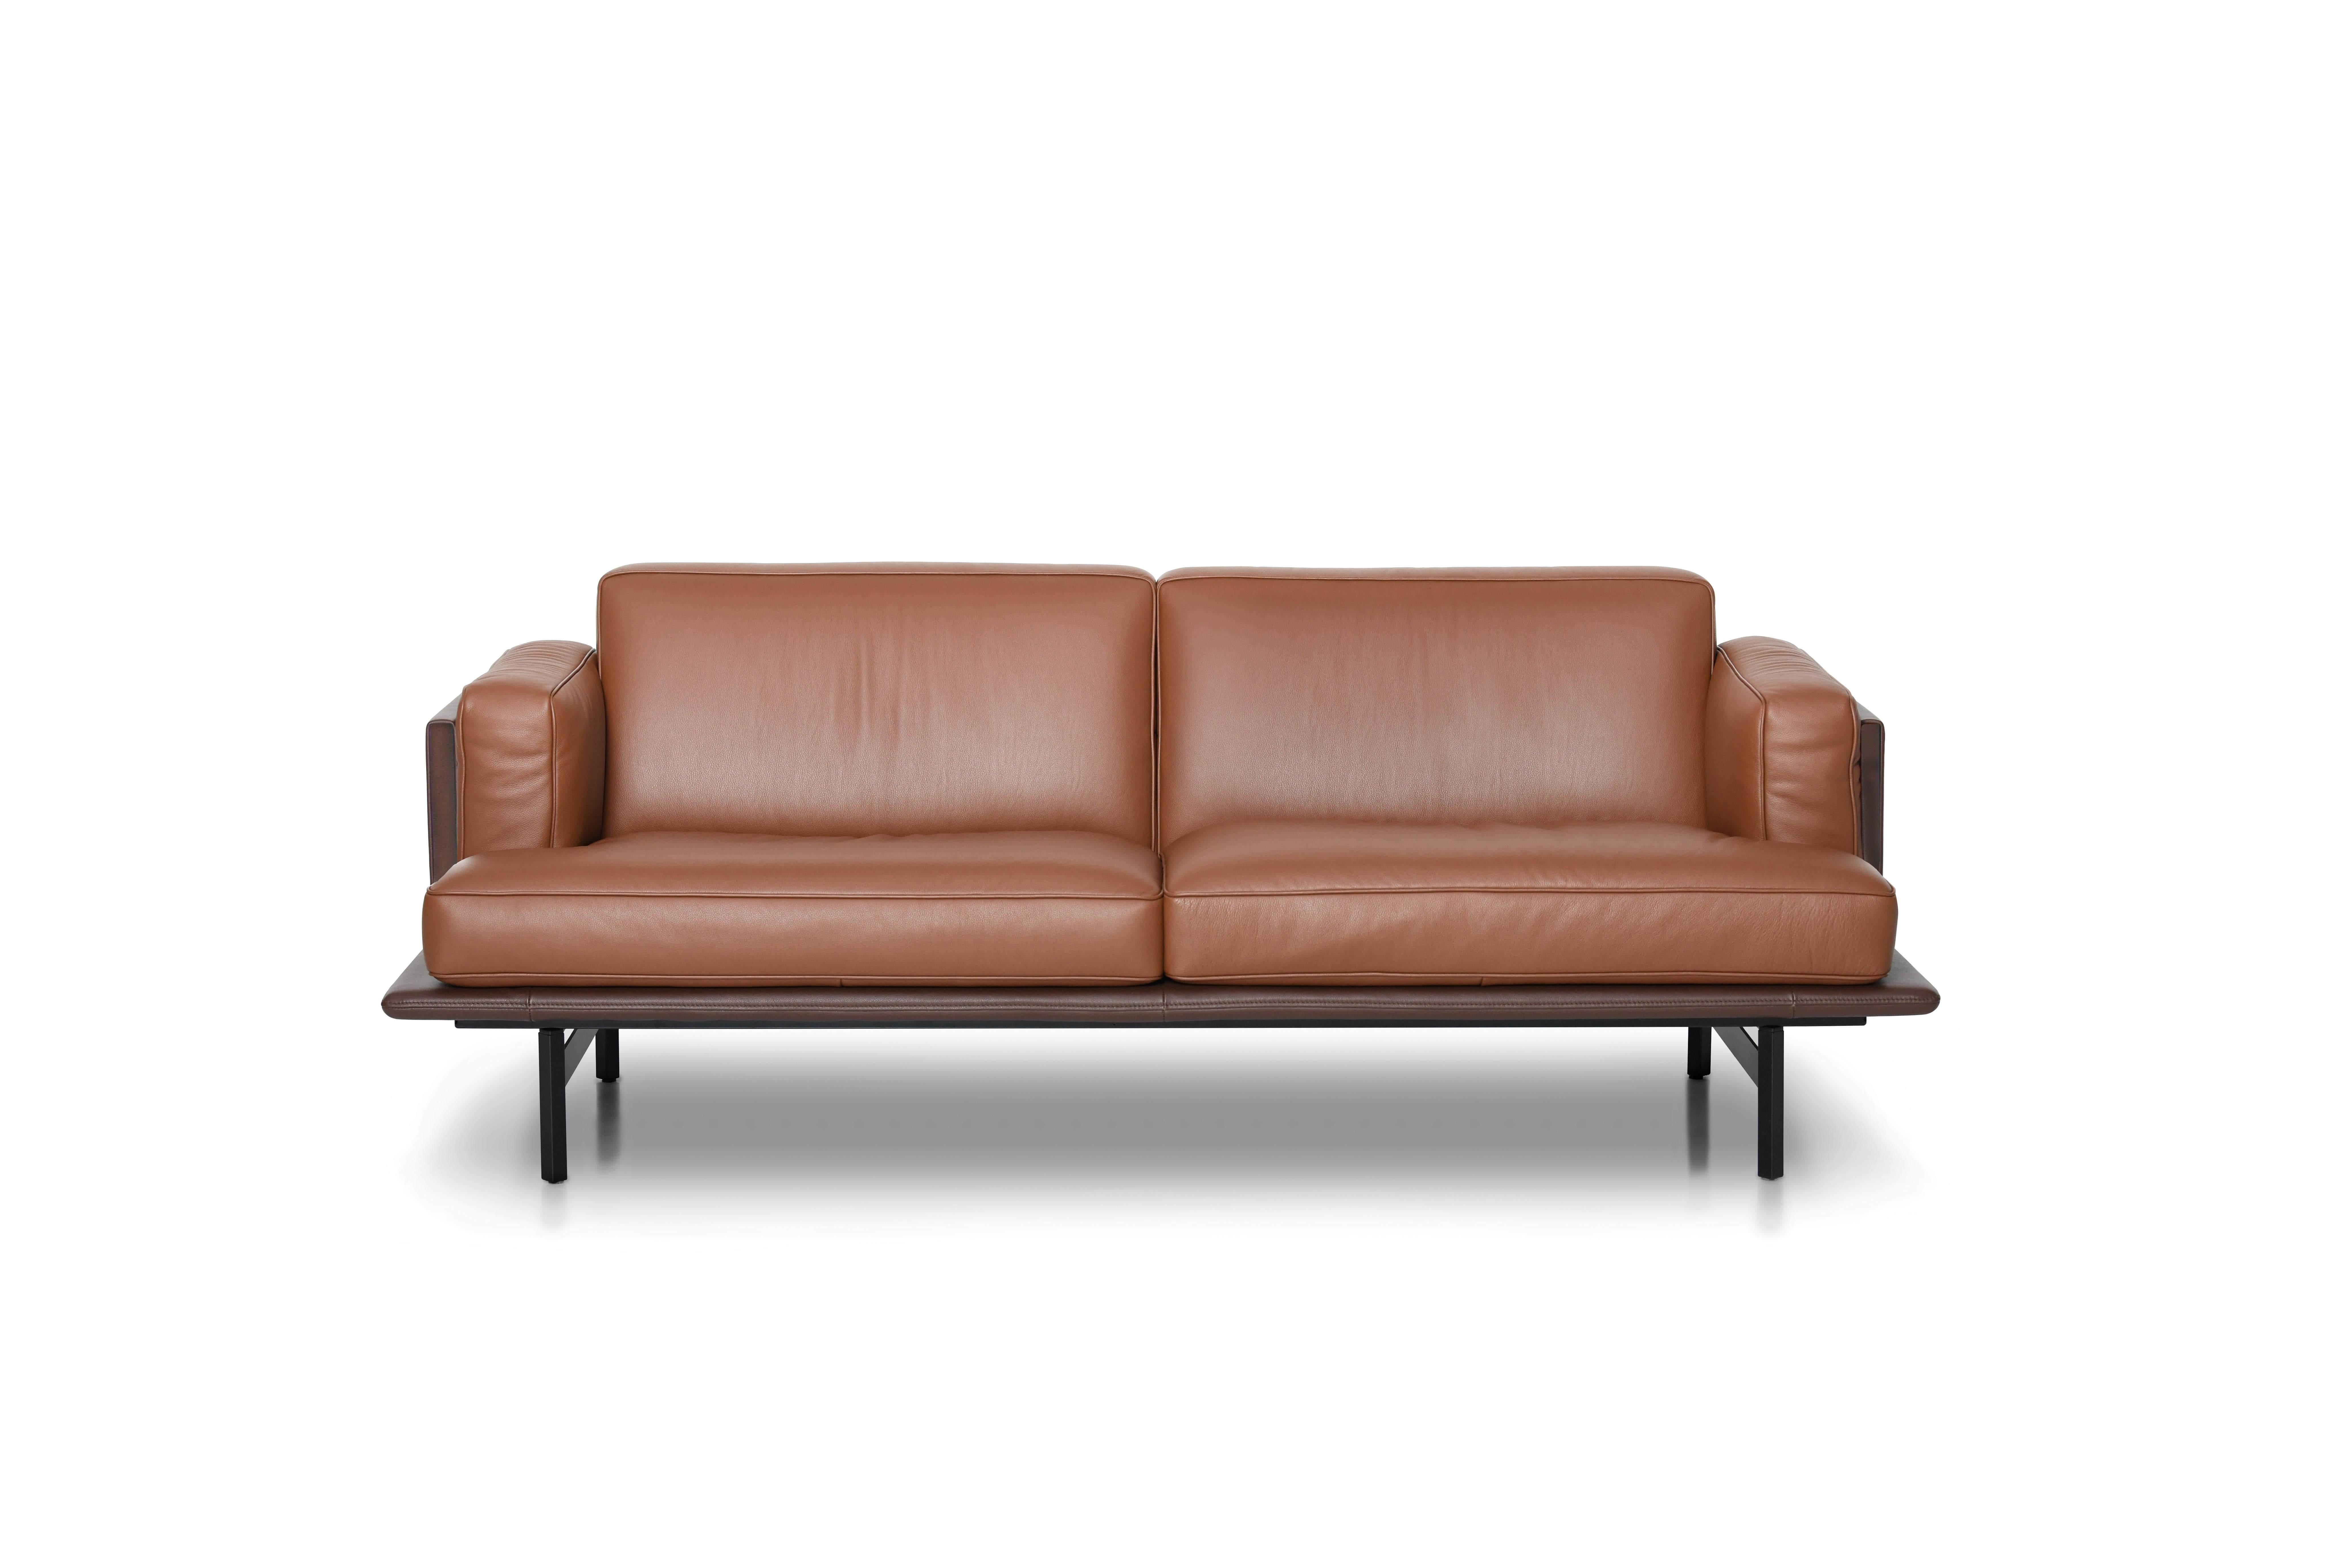 DS-175 Sofa by De Sede
Designer: Patrick Norguet
Dimensions: D 56 x W 180 x H 74
Materials: steel with matt coating (leather, fabric).
Prices may change according to the chosen materials and size. 

Belle époque meets French touch
 
It is the